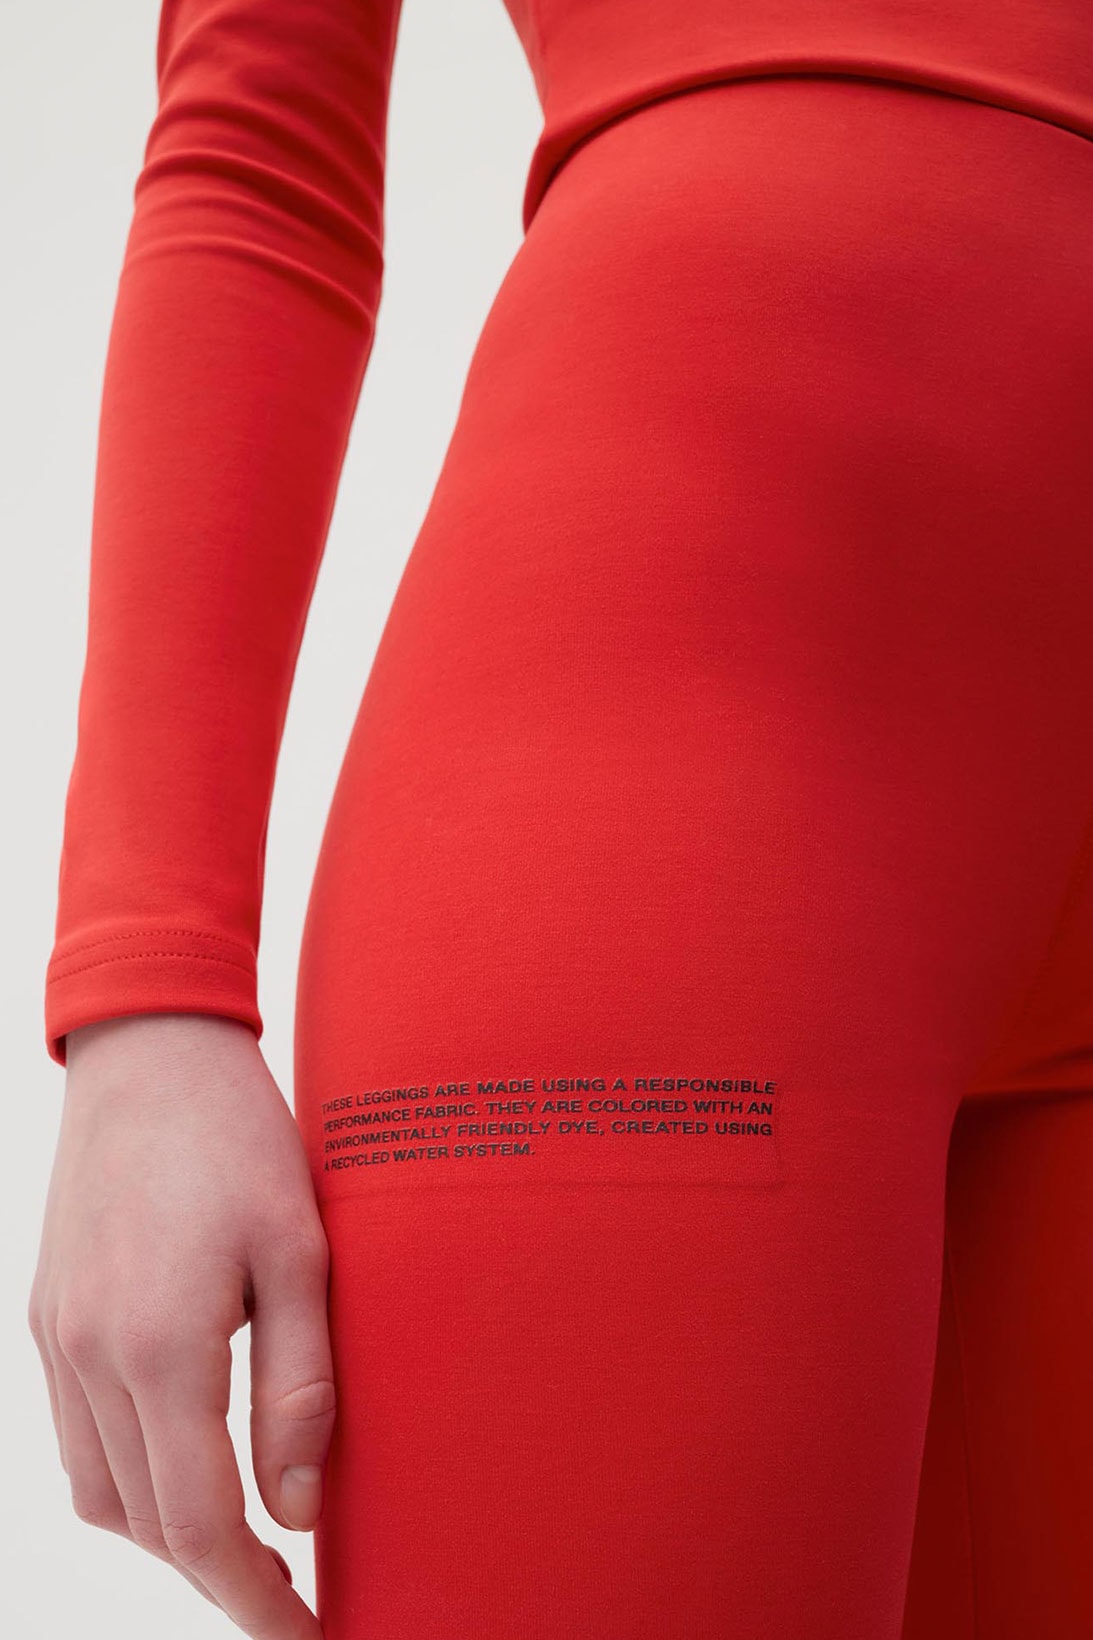 pangaia roica stretch athleisure sustainable collection turtleneck top leggings red